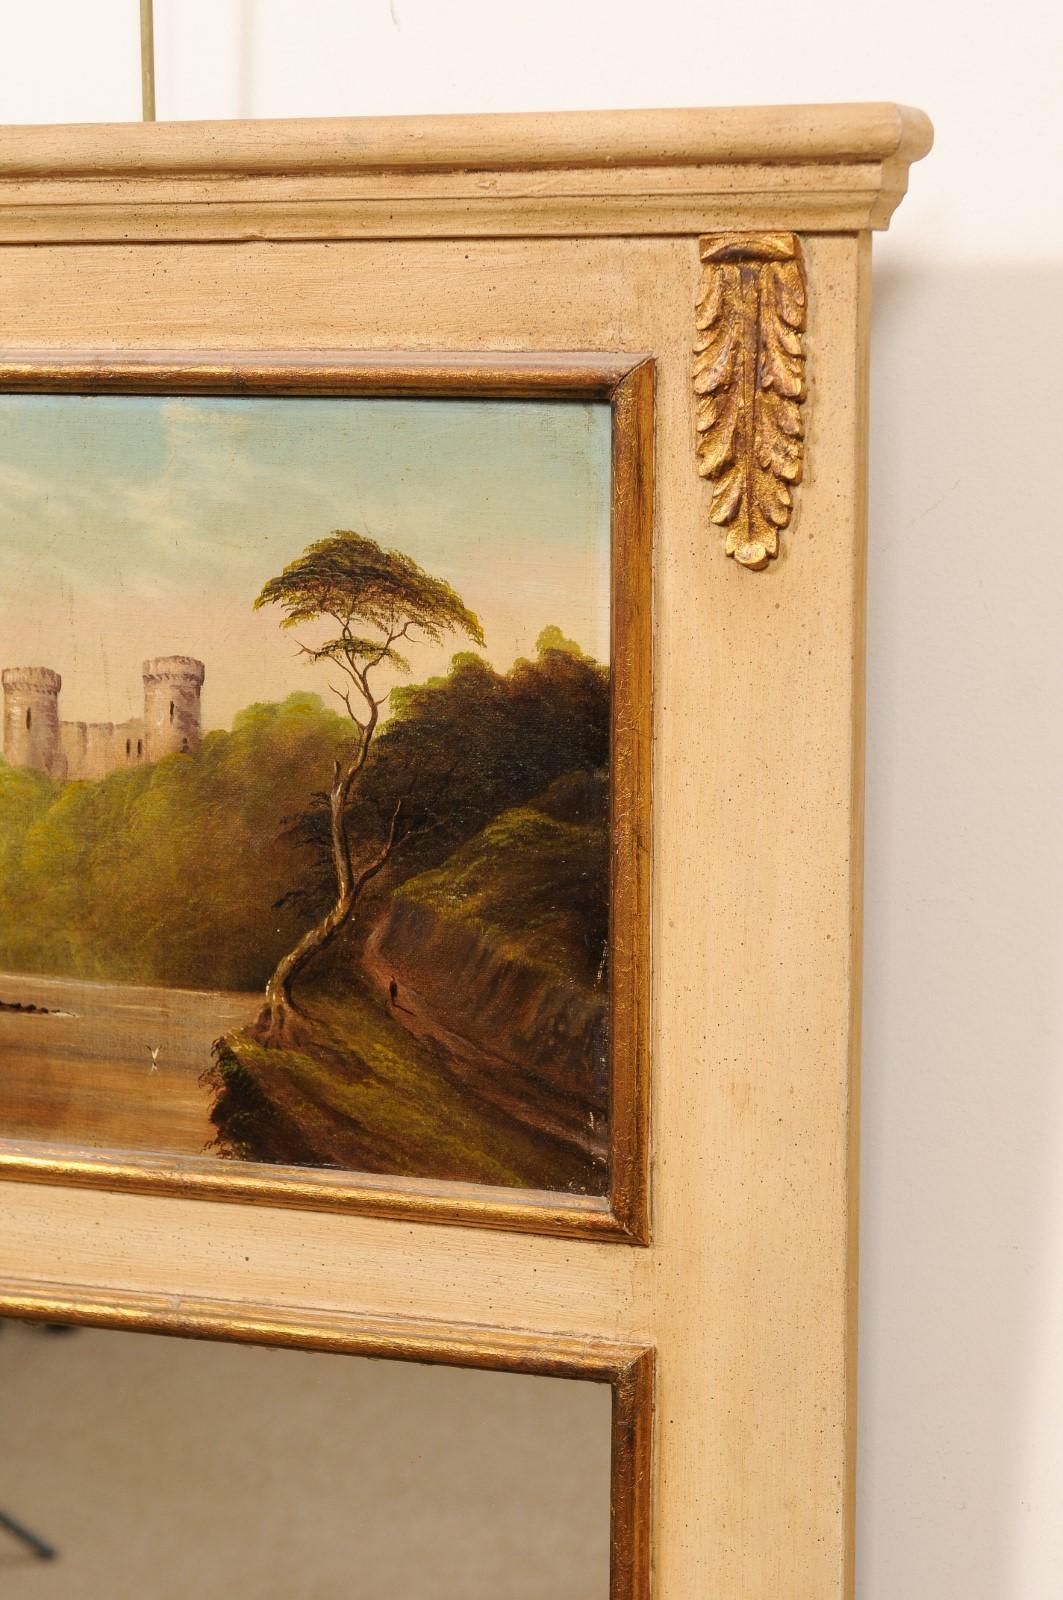 Wood Small Trumeau Mirror with 19th Century Landscape Painting, France For Sale